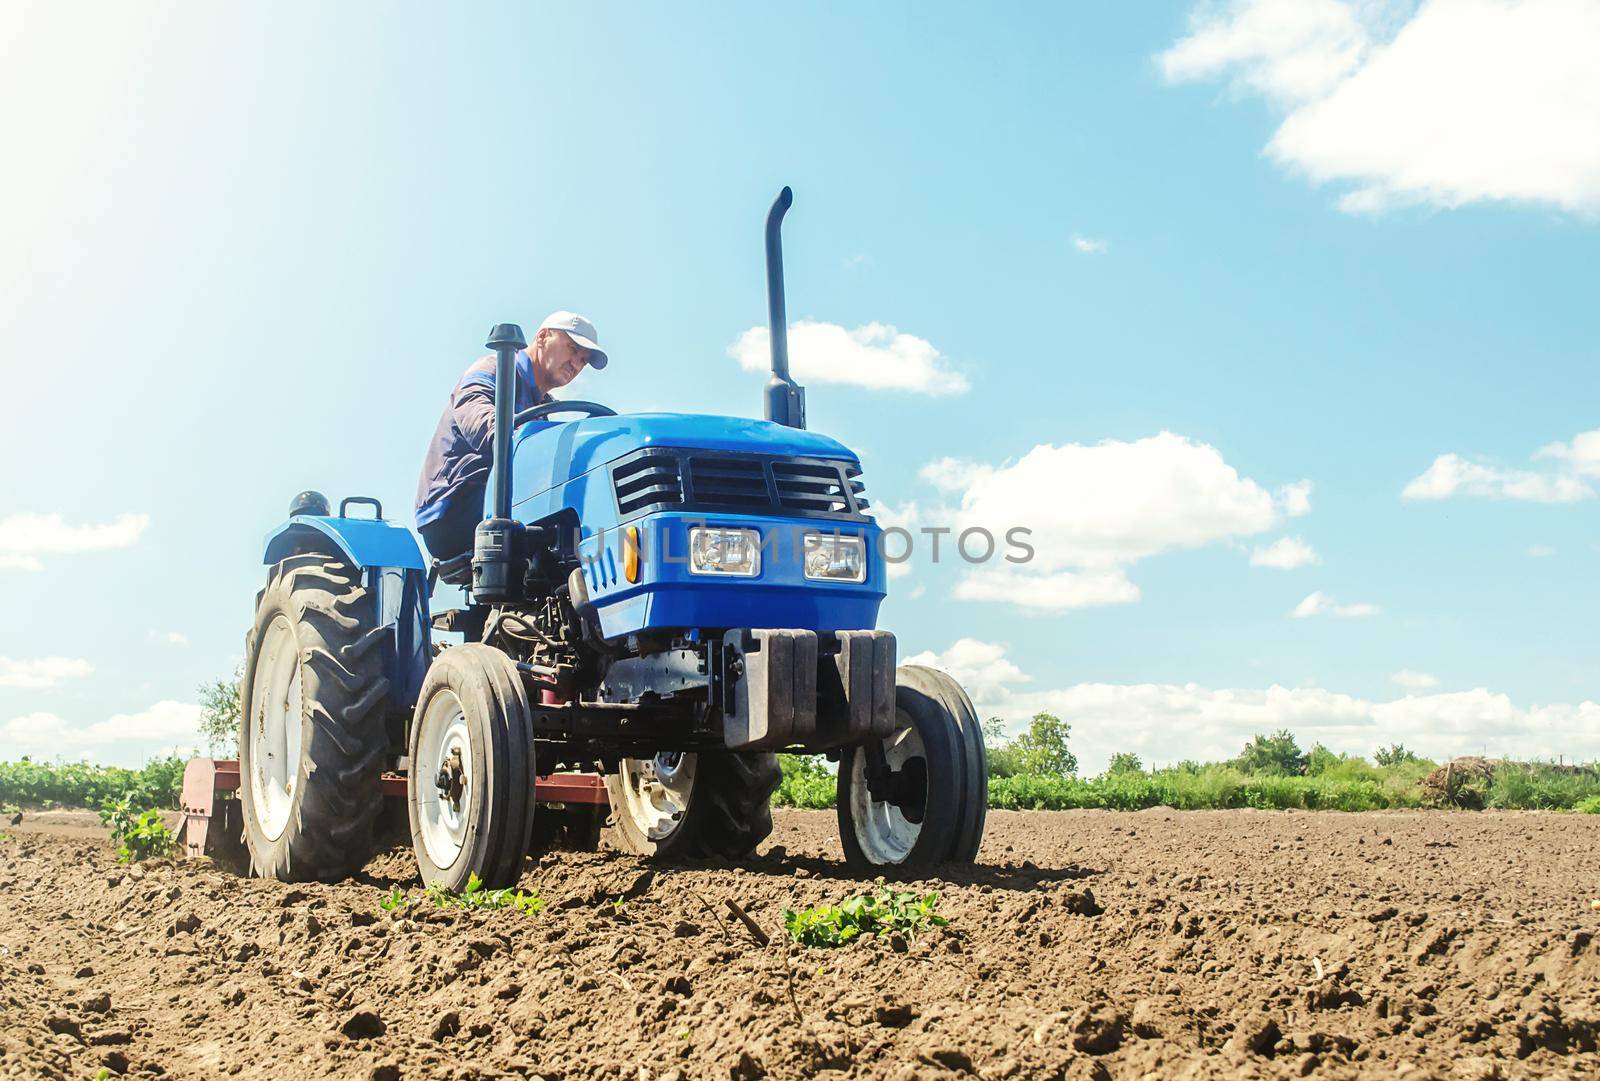 The farmer works on a tractor. Loosening the surface, cultivating the land for further planting. Grinding and loosening soil, removing plants roots from last harvest. Cultivation technology equipment. by iLixe48